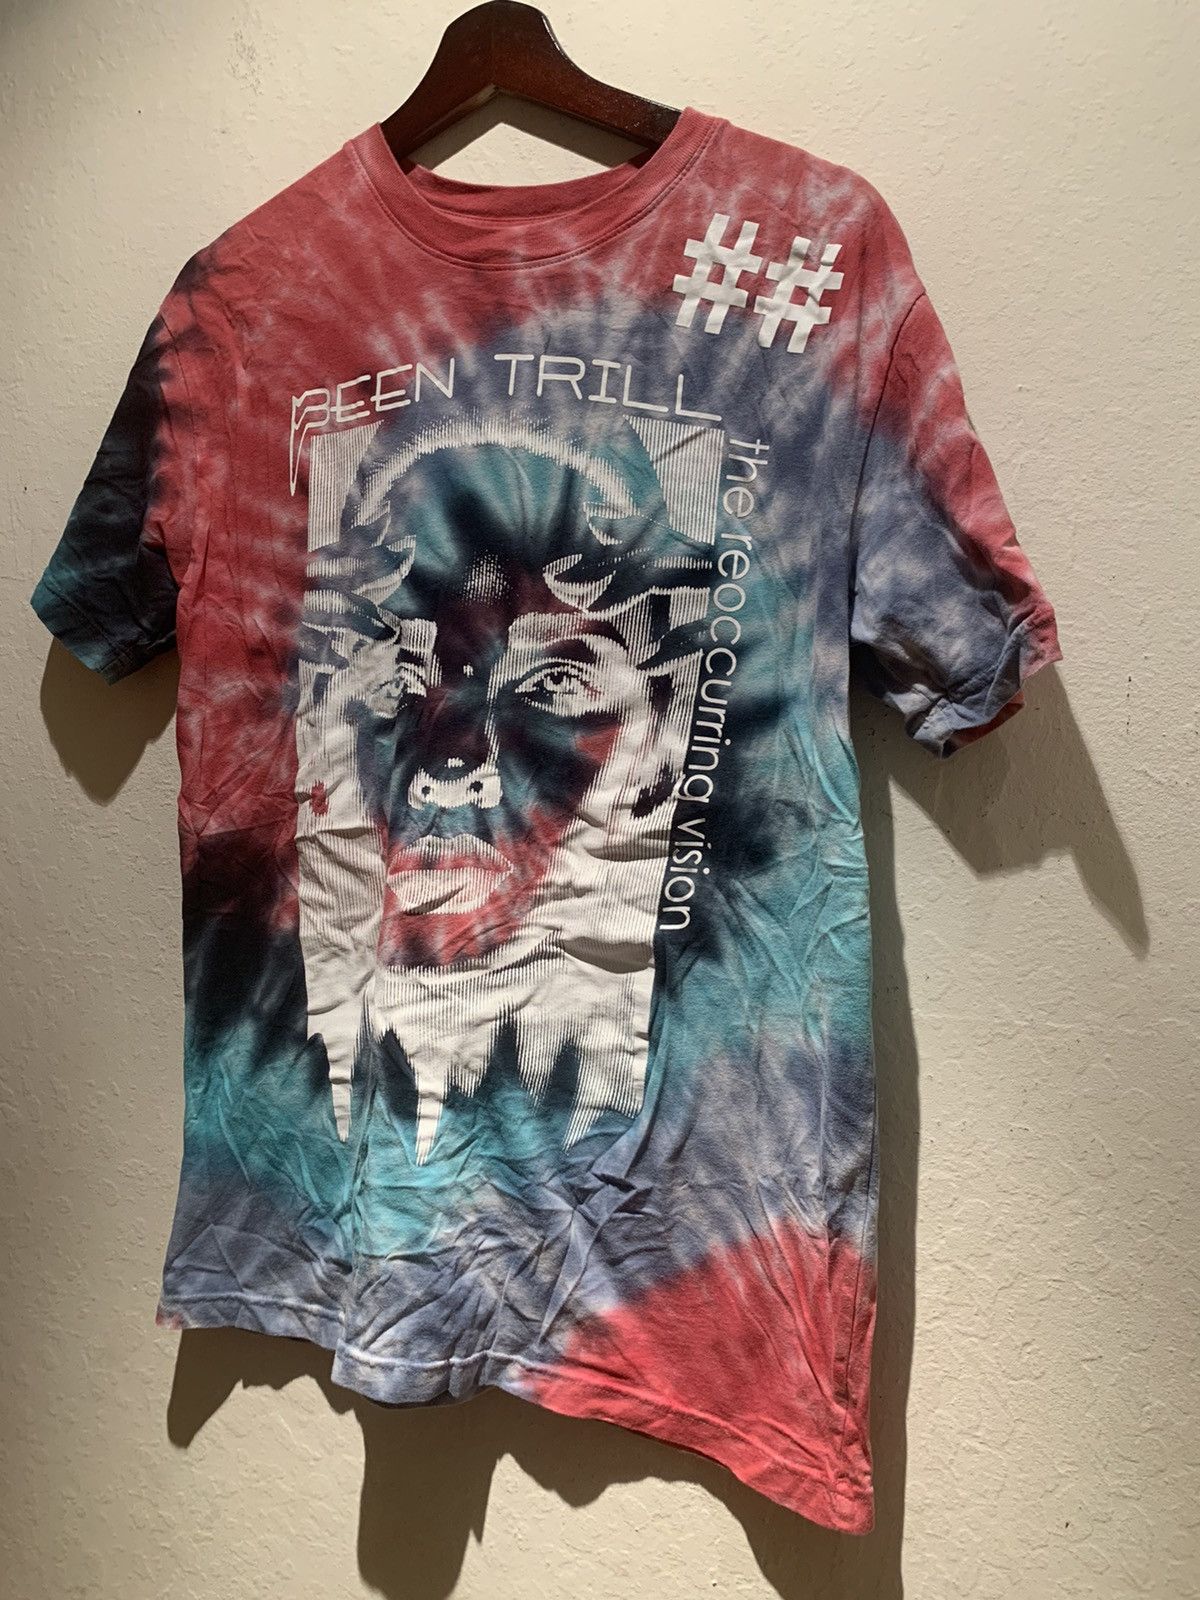 Vintage *RARE* Vintage Been Trill Reoccurring Vision All-Over Shirt Size US M / EU 48-50 / 2 - 1 Preview